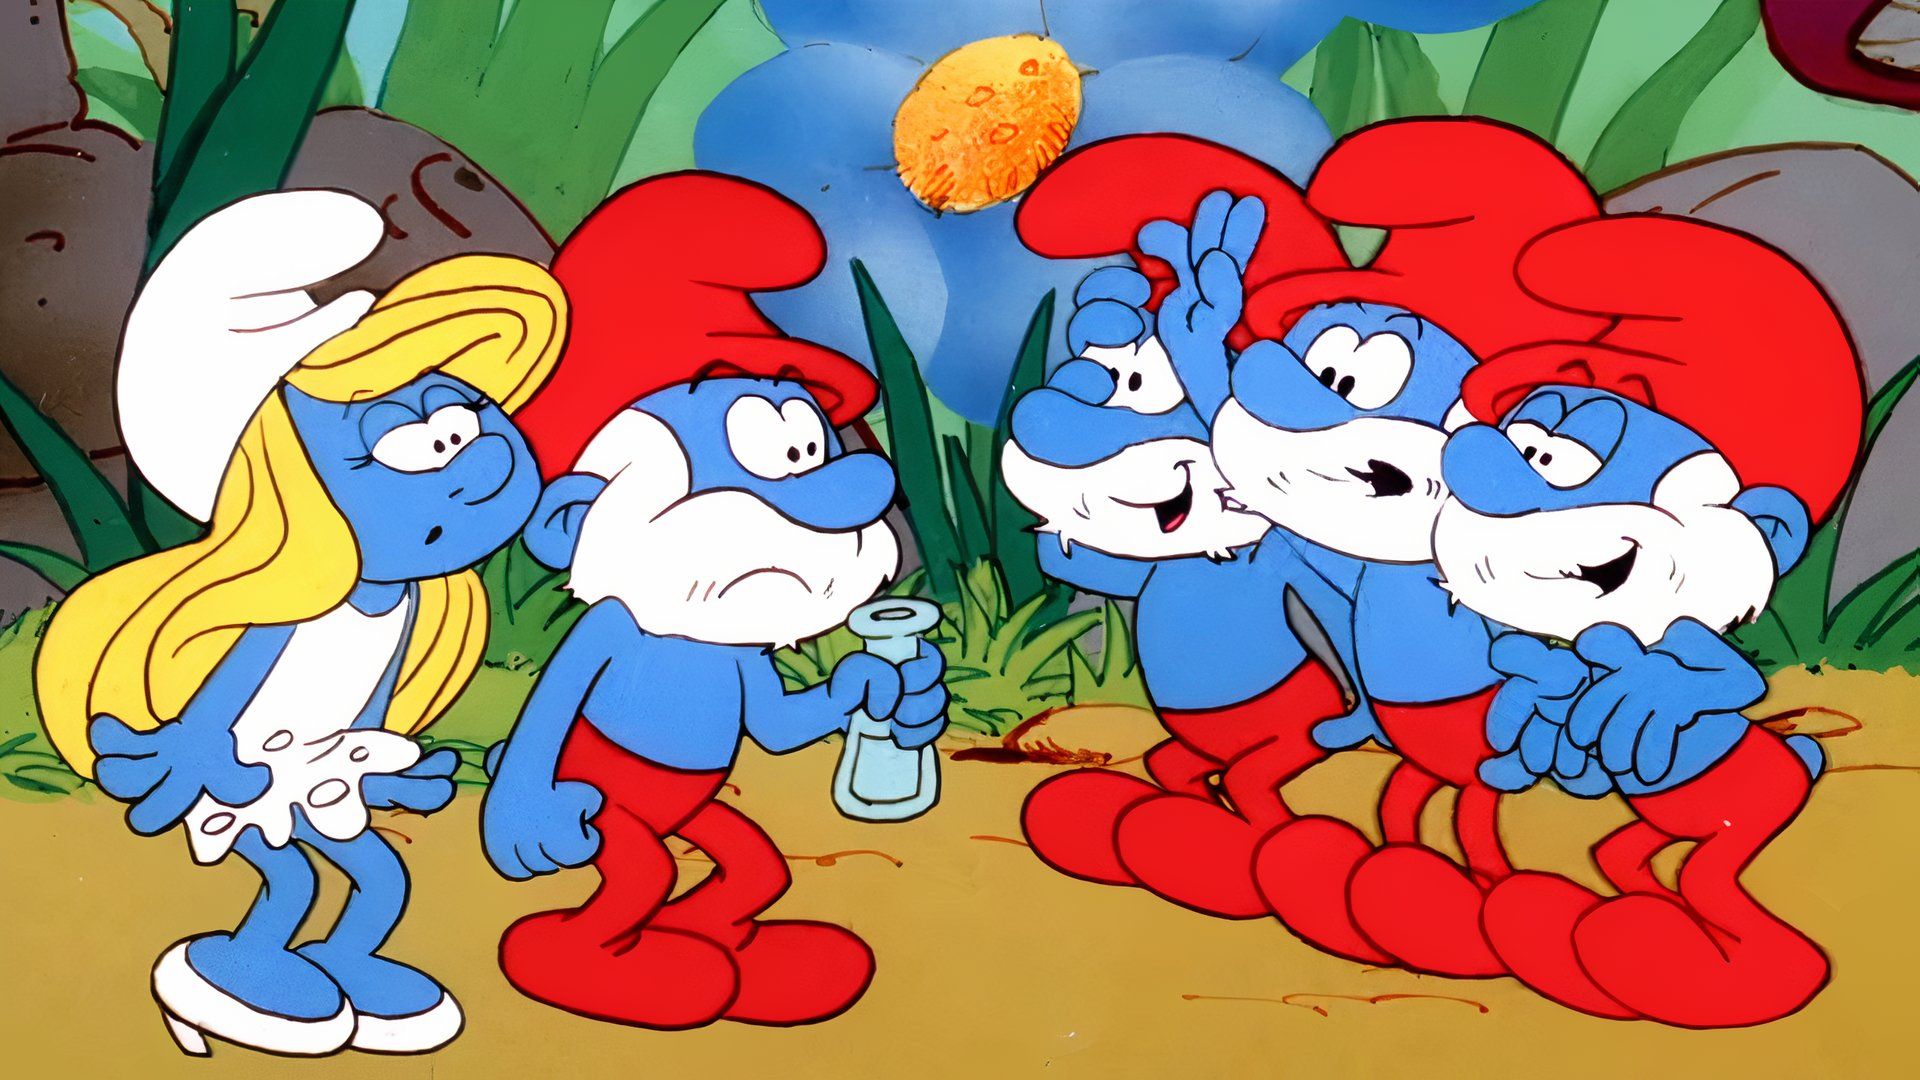 Papa Smurf meets clones in The Smurfs